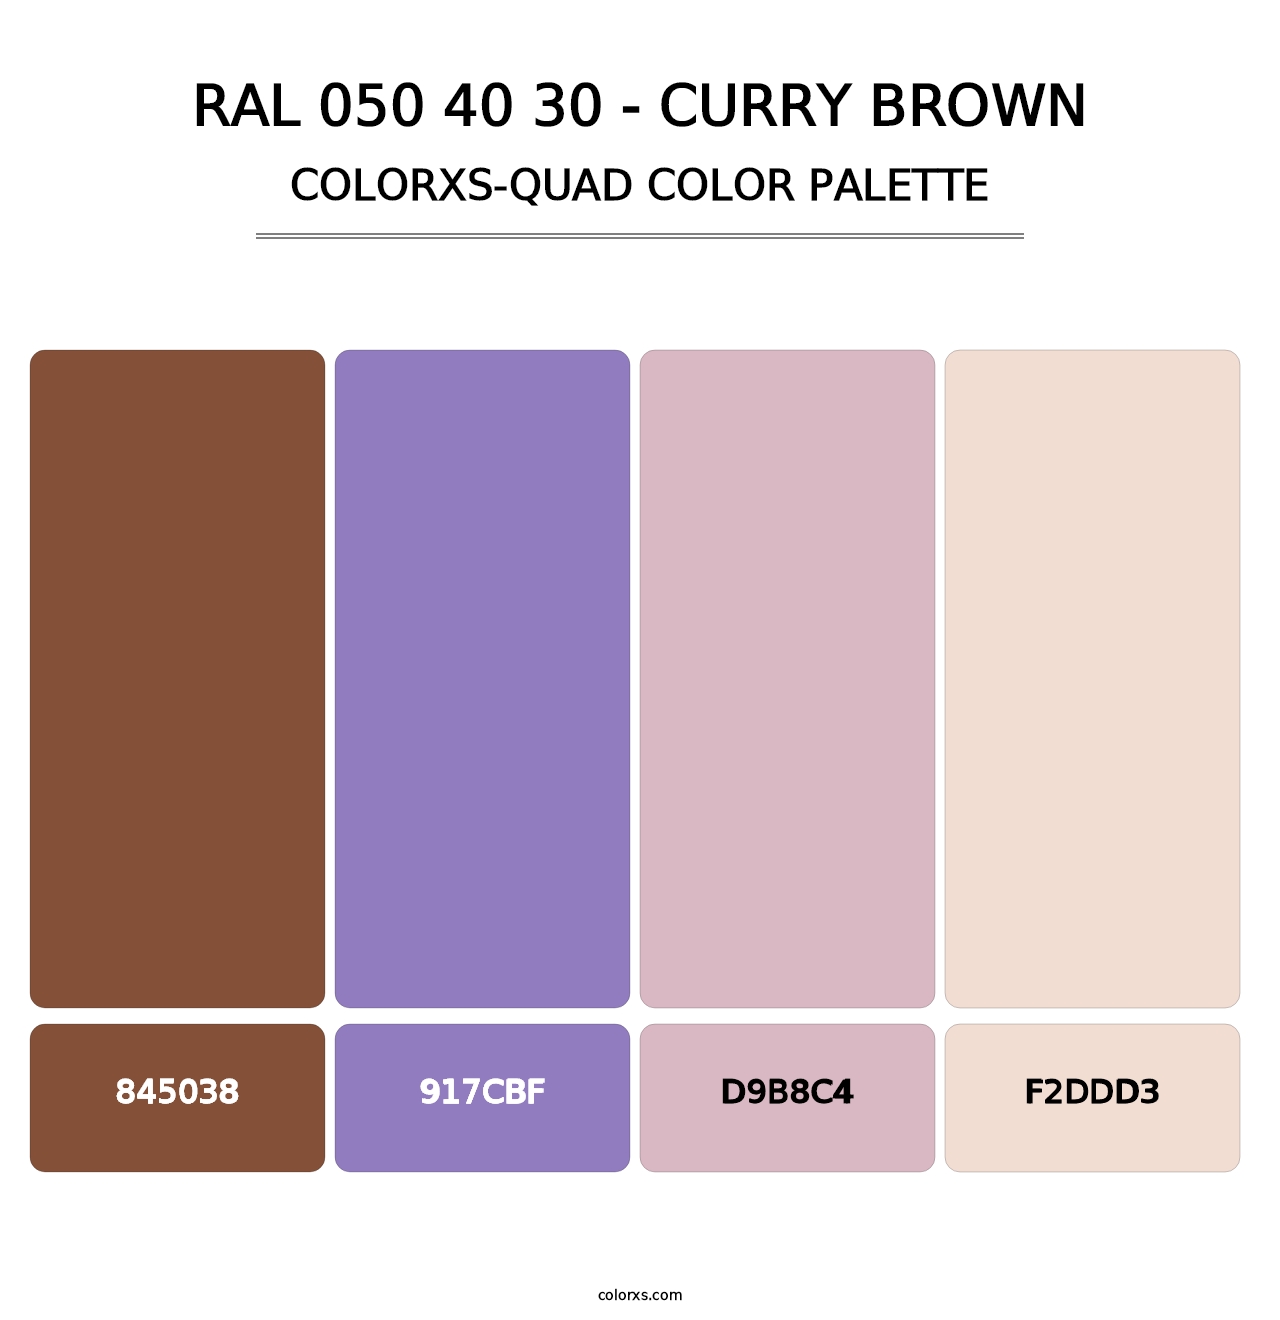 RAL 050 40 30 - Curry Brown - Colorxs Quad Palette